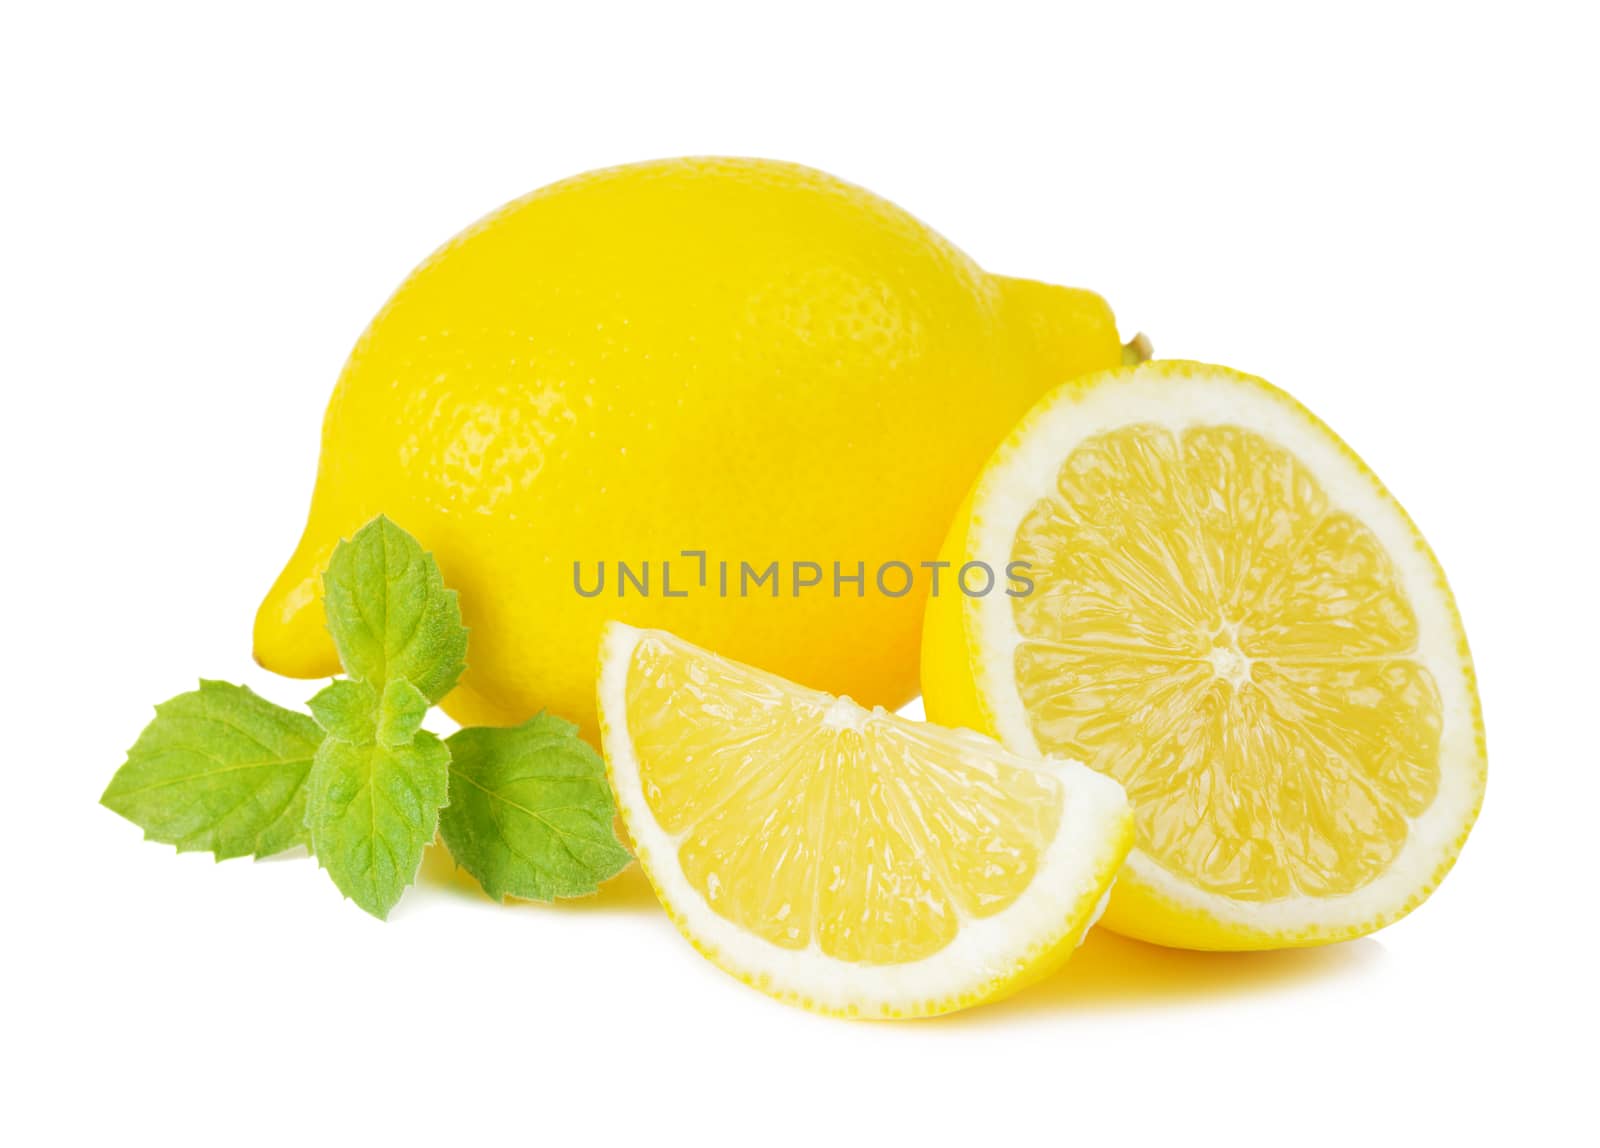 Juicy yellow cut lemon and green leaves of fresh mint isolated on white background